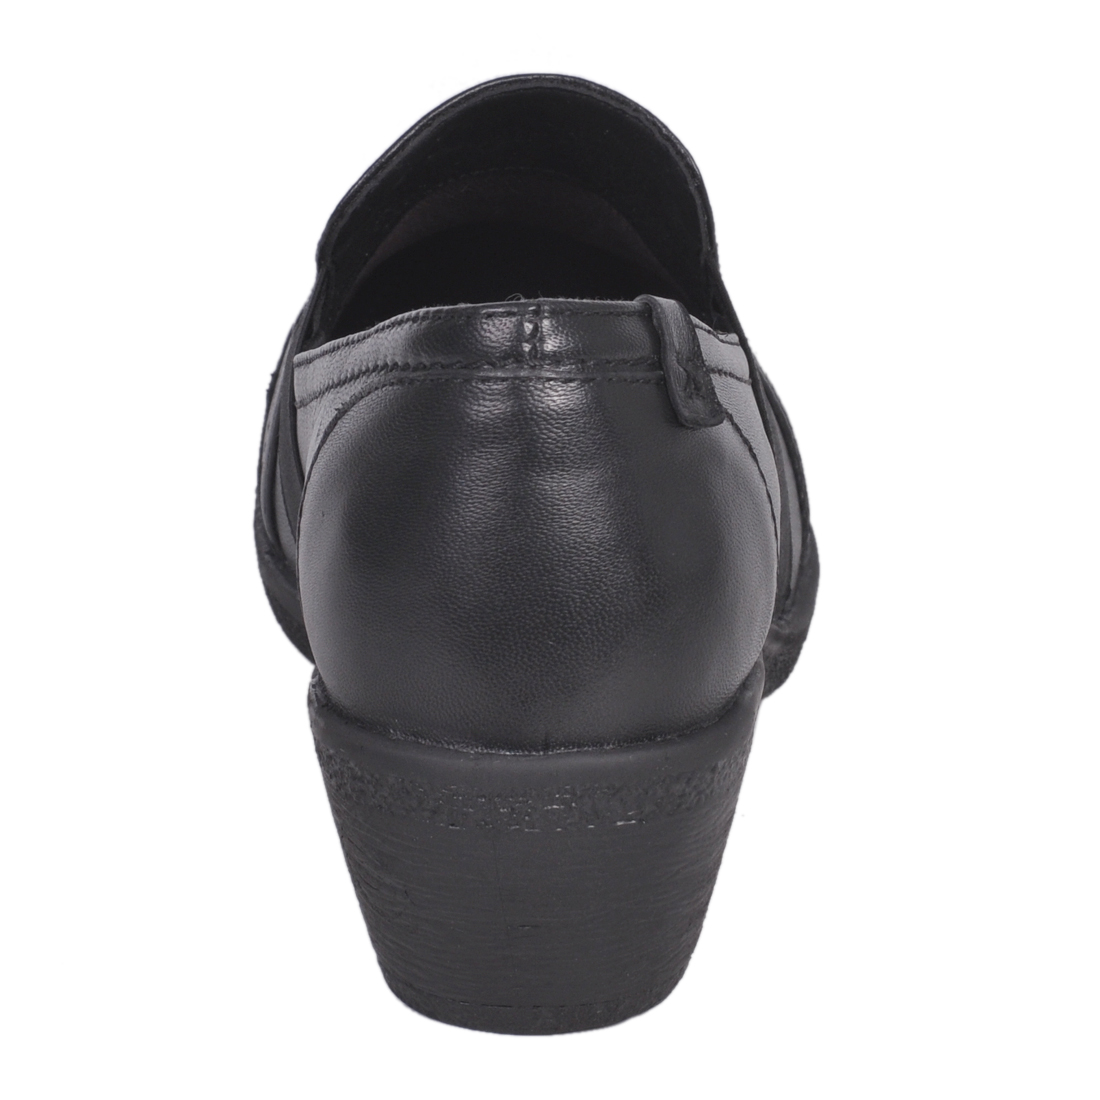 Buy Papa Leather Women's Black Formals Shoes Online @ ₹699 from ShopClues